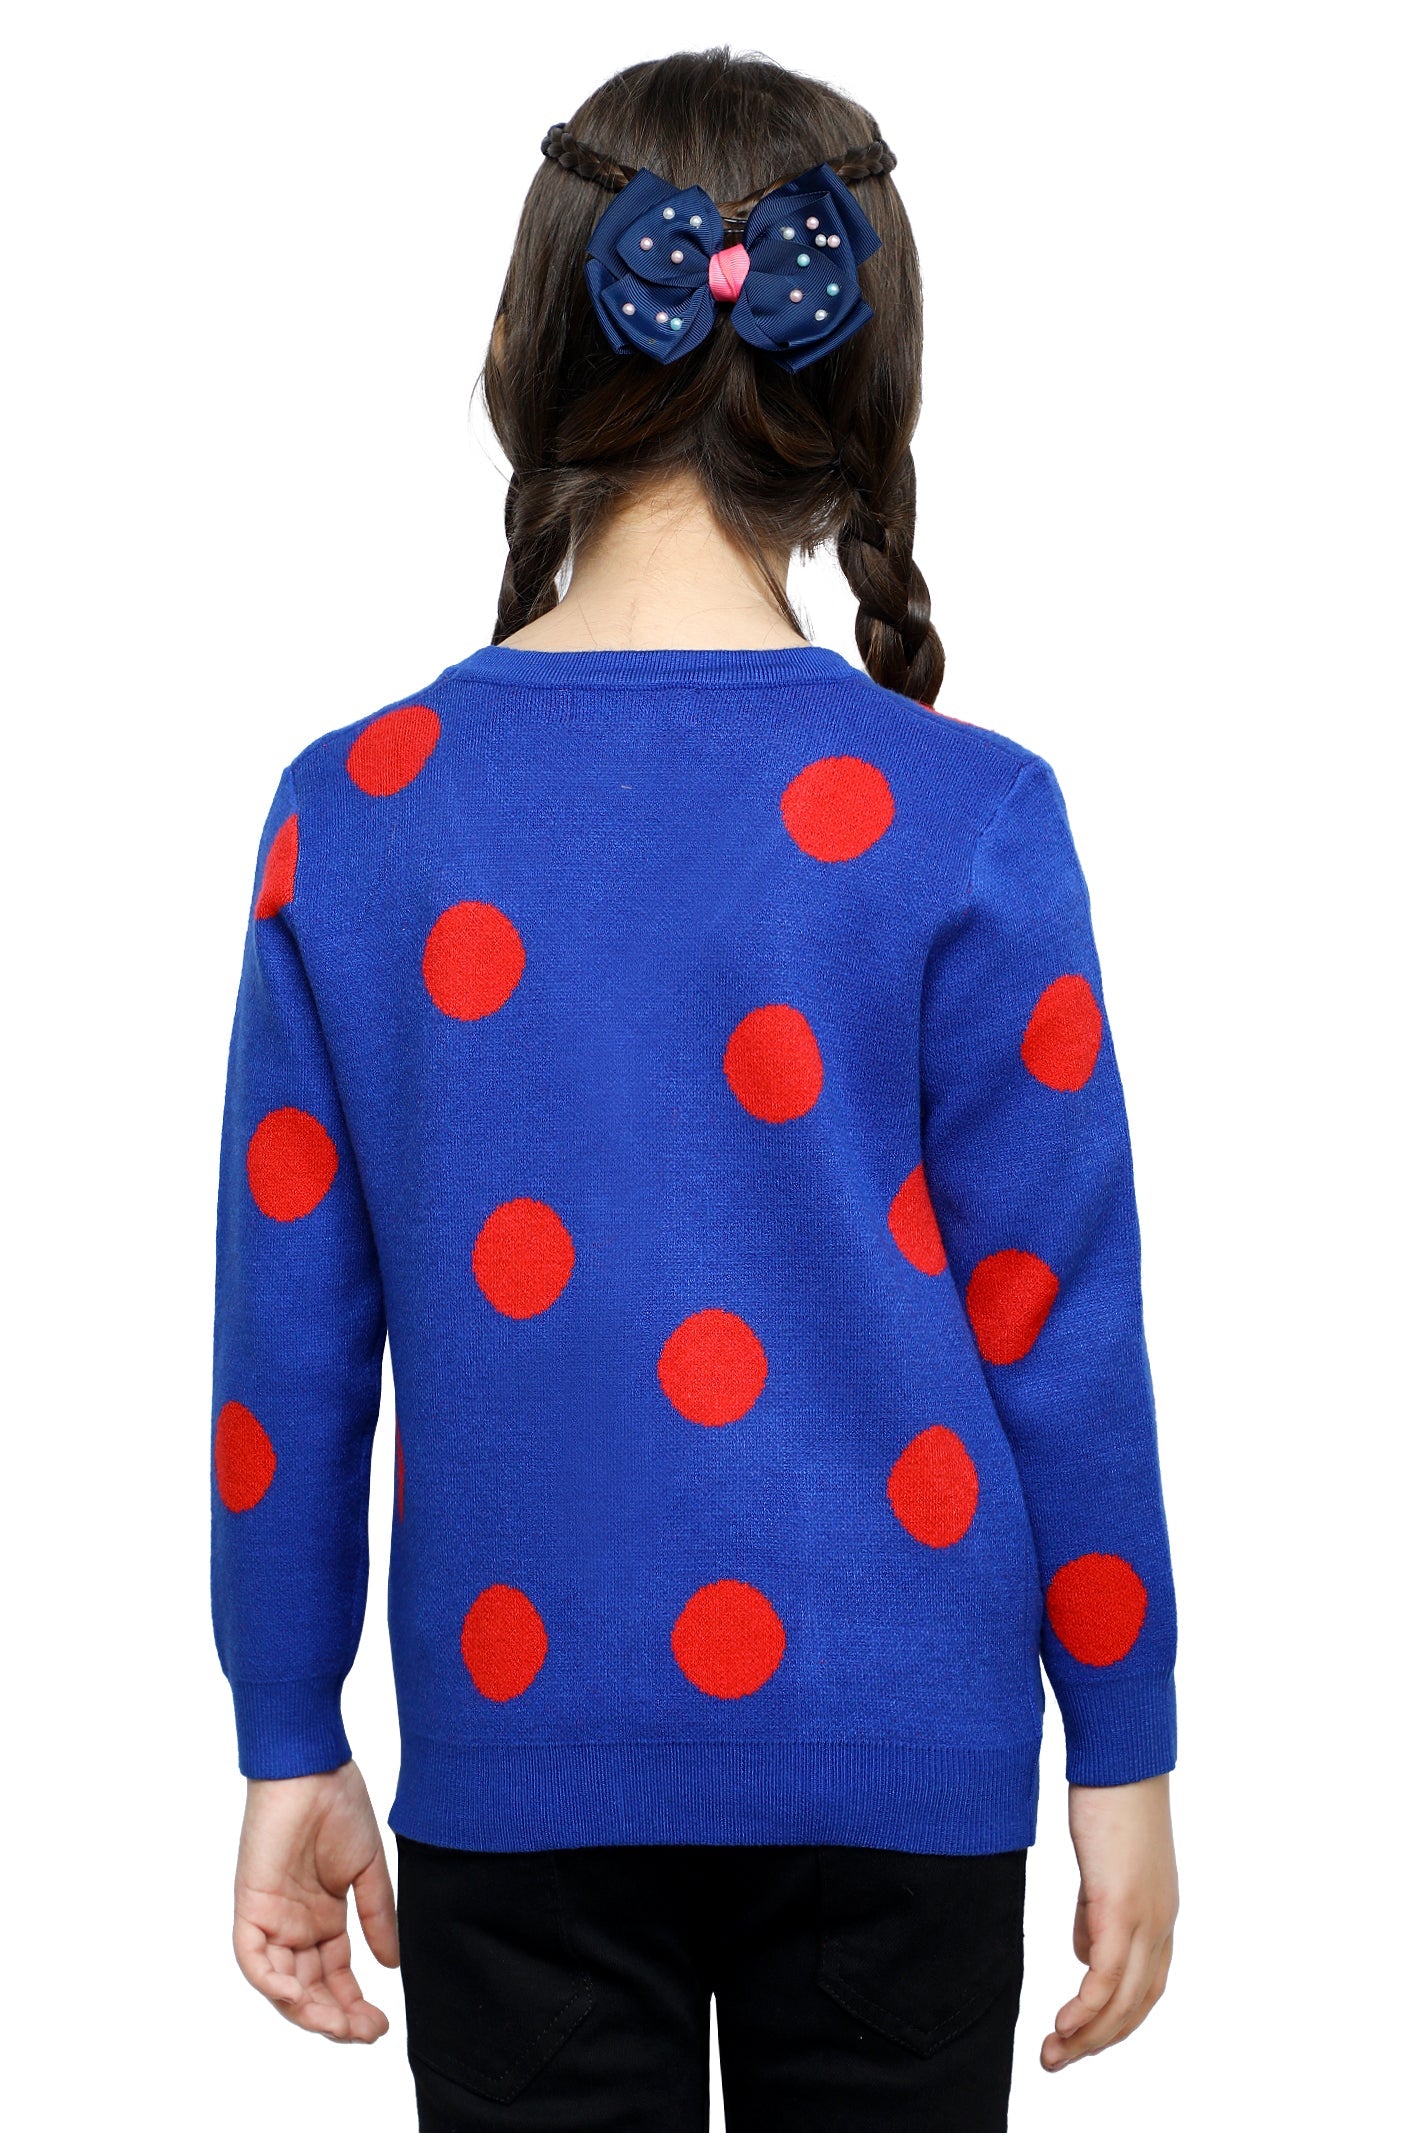 Girls Sweater SKU: KGE-0150-BLUE - Diners